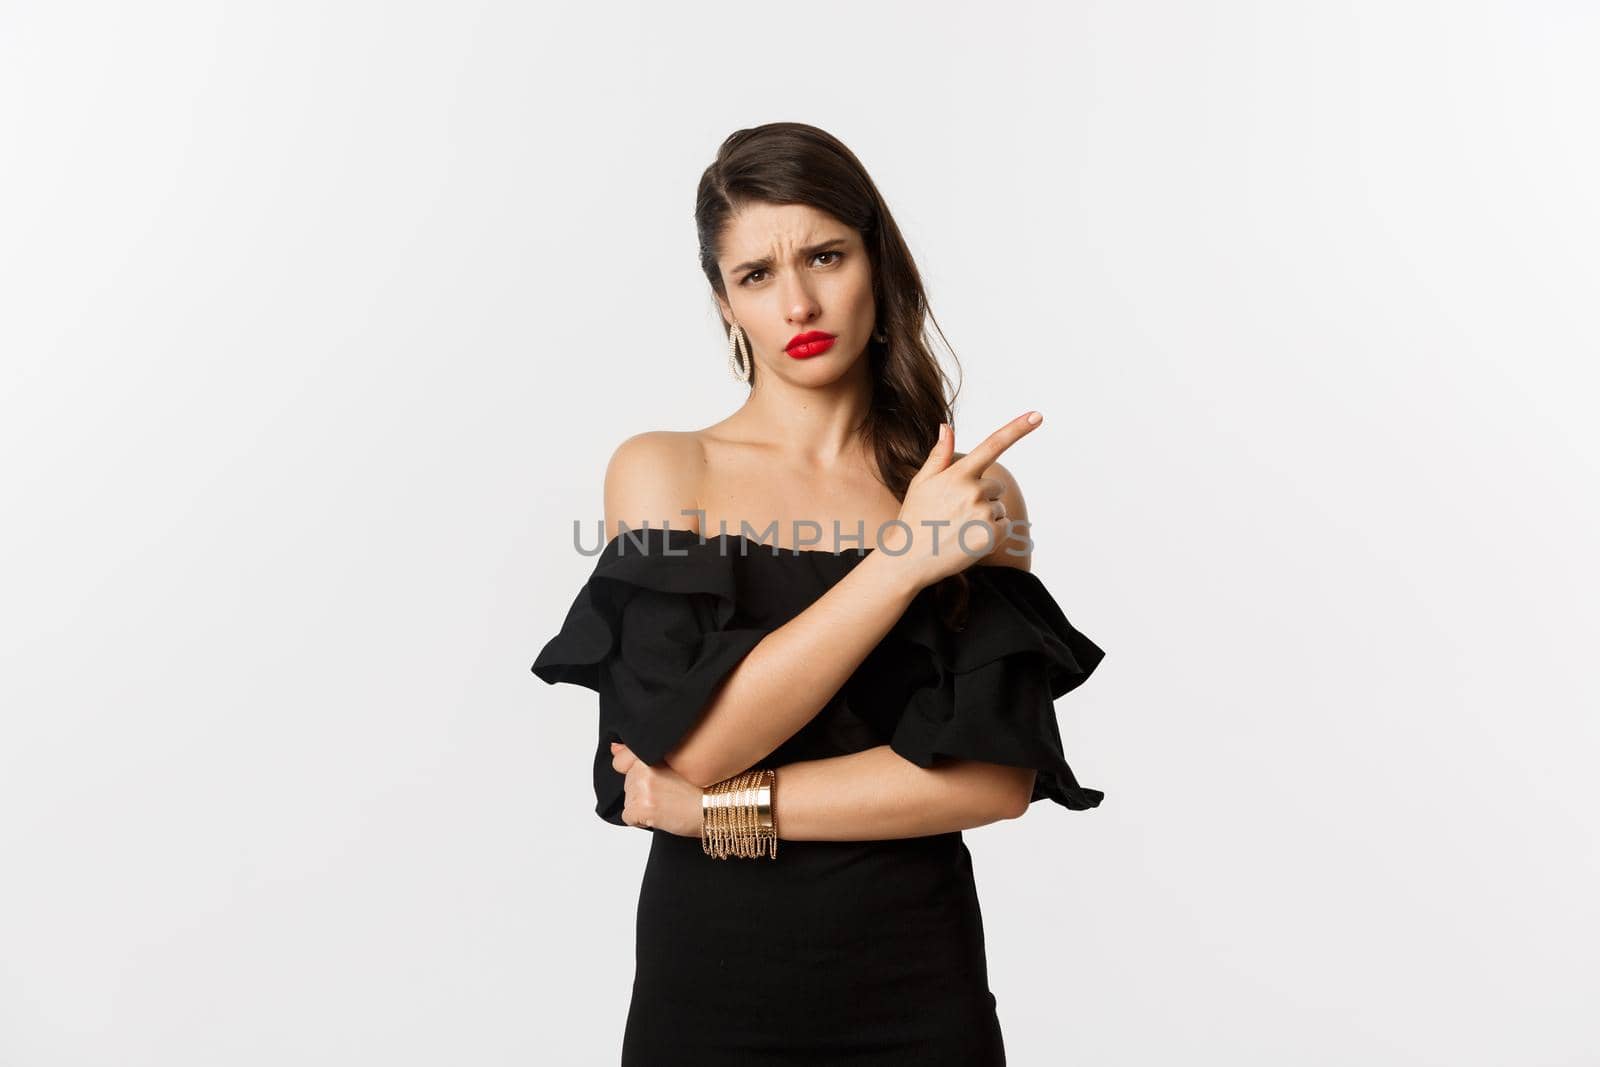 Fashion and beauty. Skeptical glamour woman with red lips, black dress, pointing finger right at something lame and boring, standing over white background.